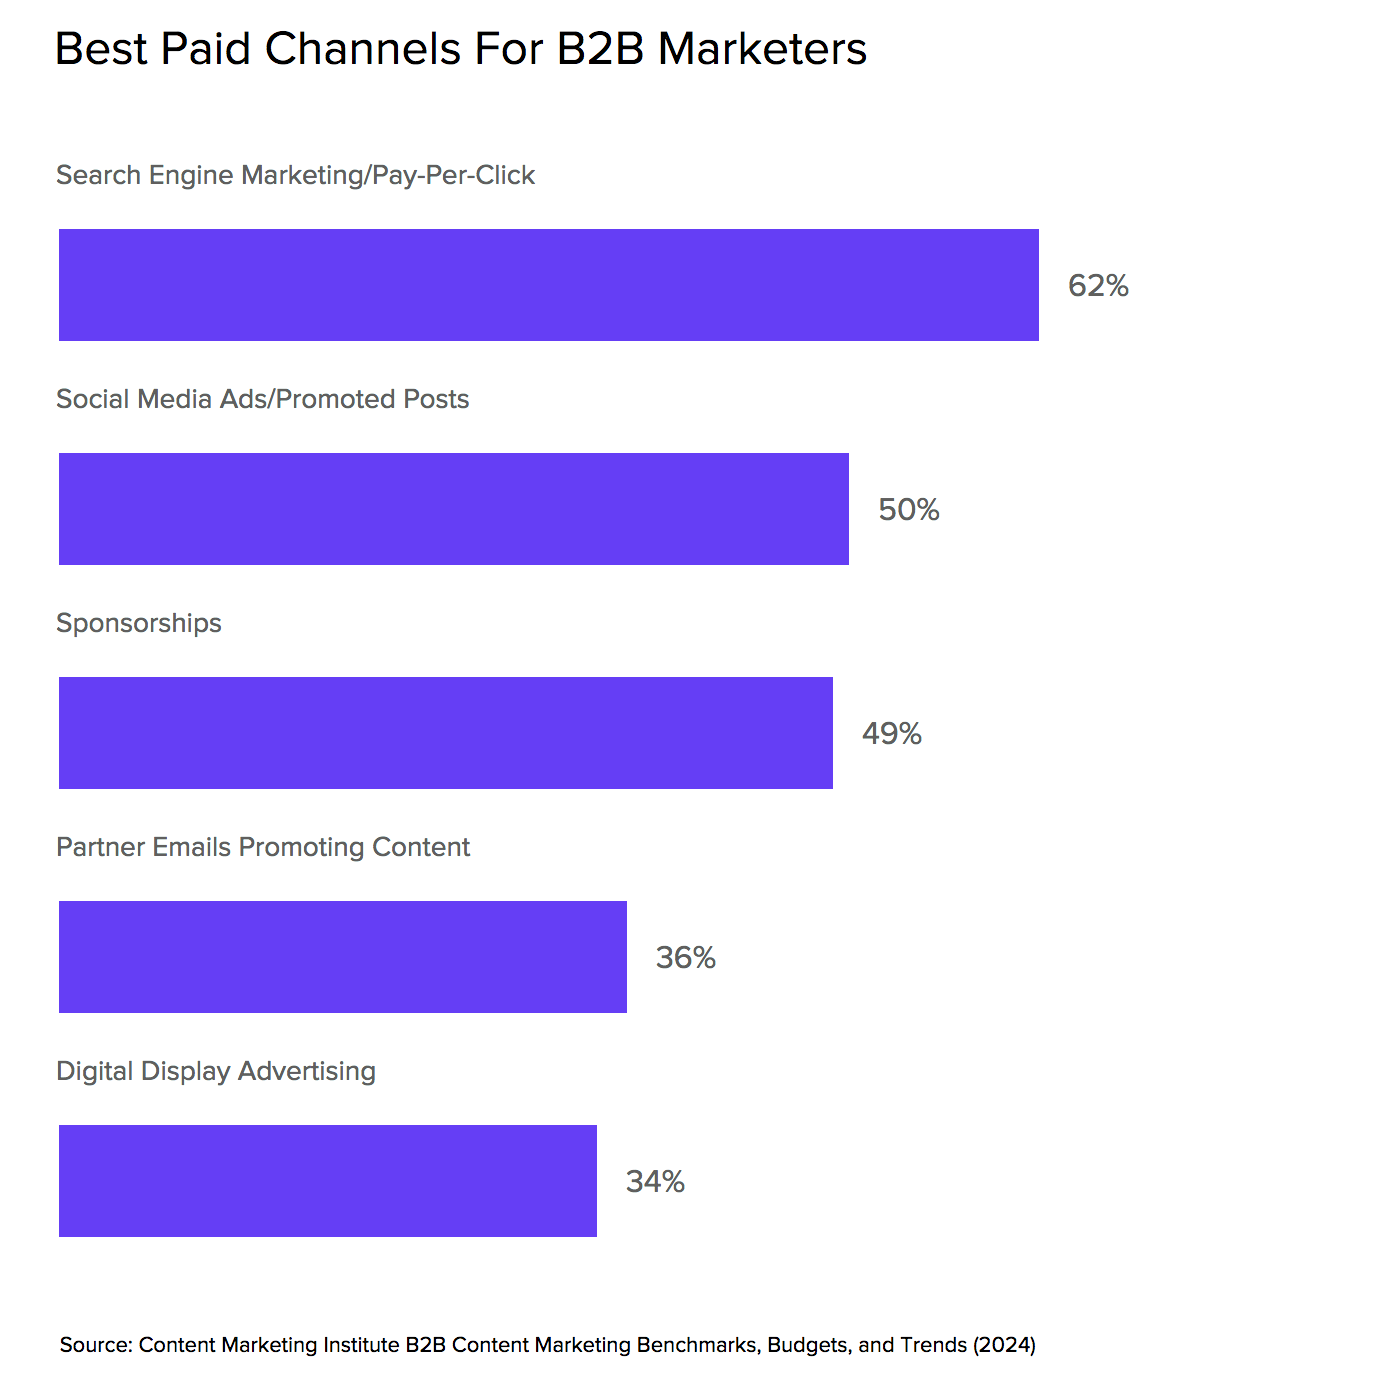 Best Paid Media Channels for B2B Marketers